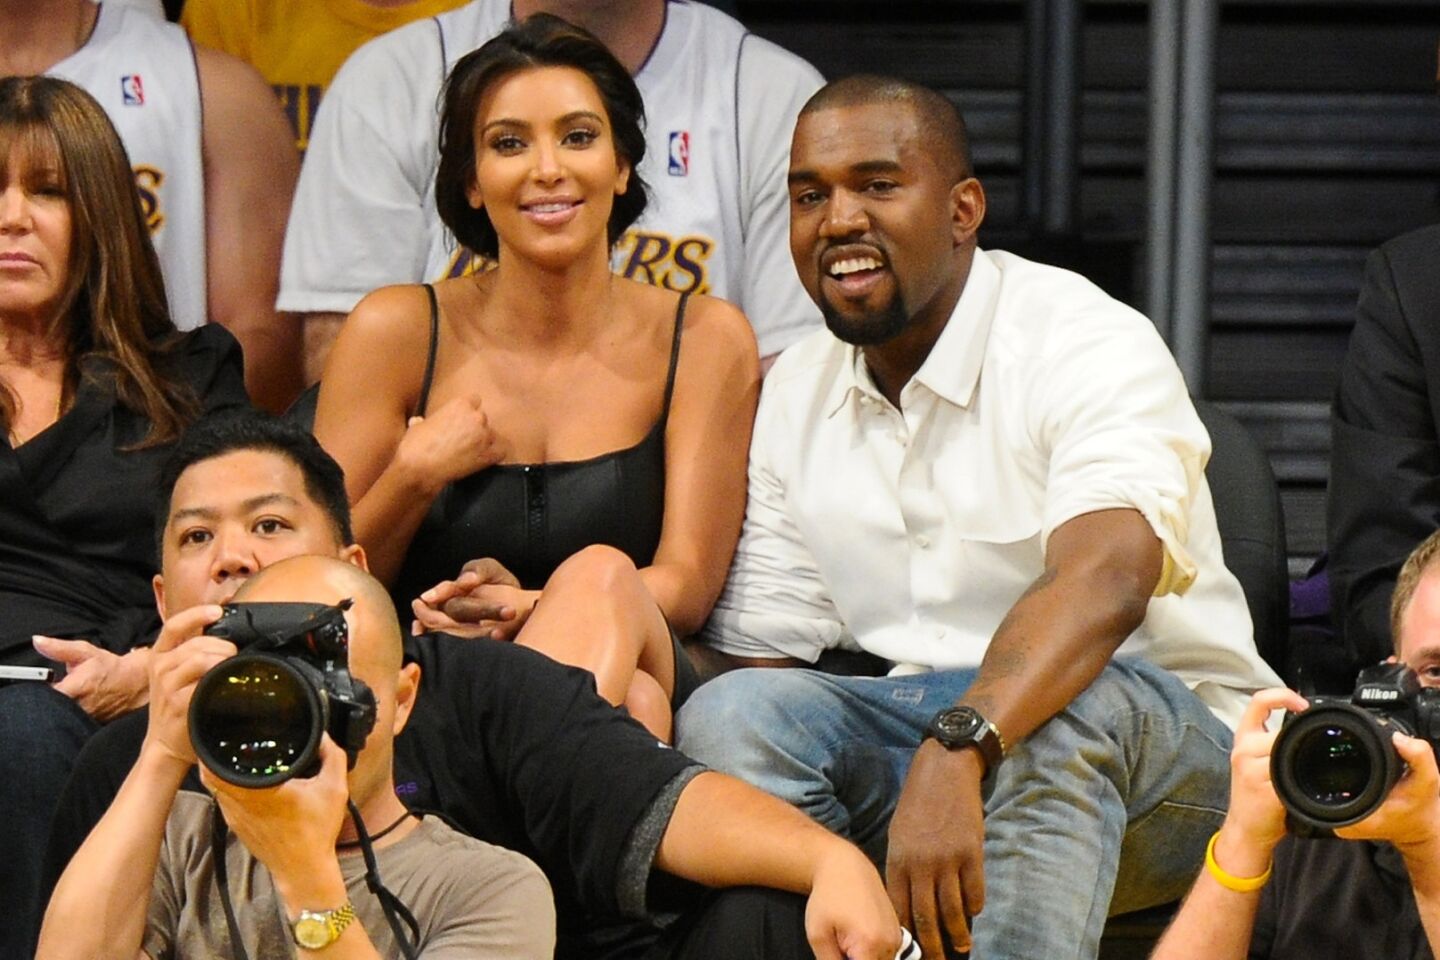 Kim Kardashian and Kanye West attend the Lakers-Denver Nuggets game on May 12, 2012, at Staples Center in Los Angeles.